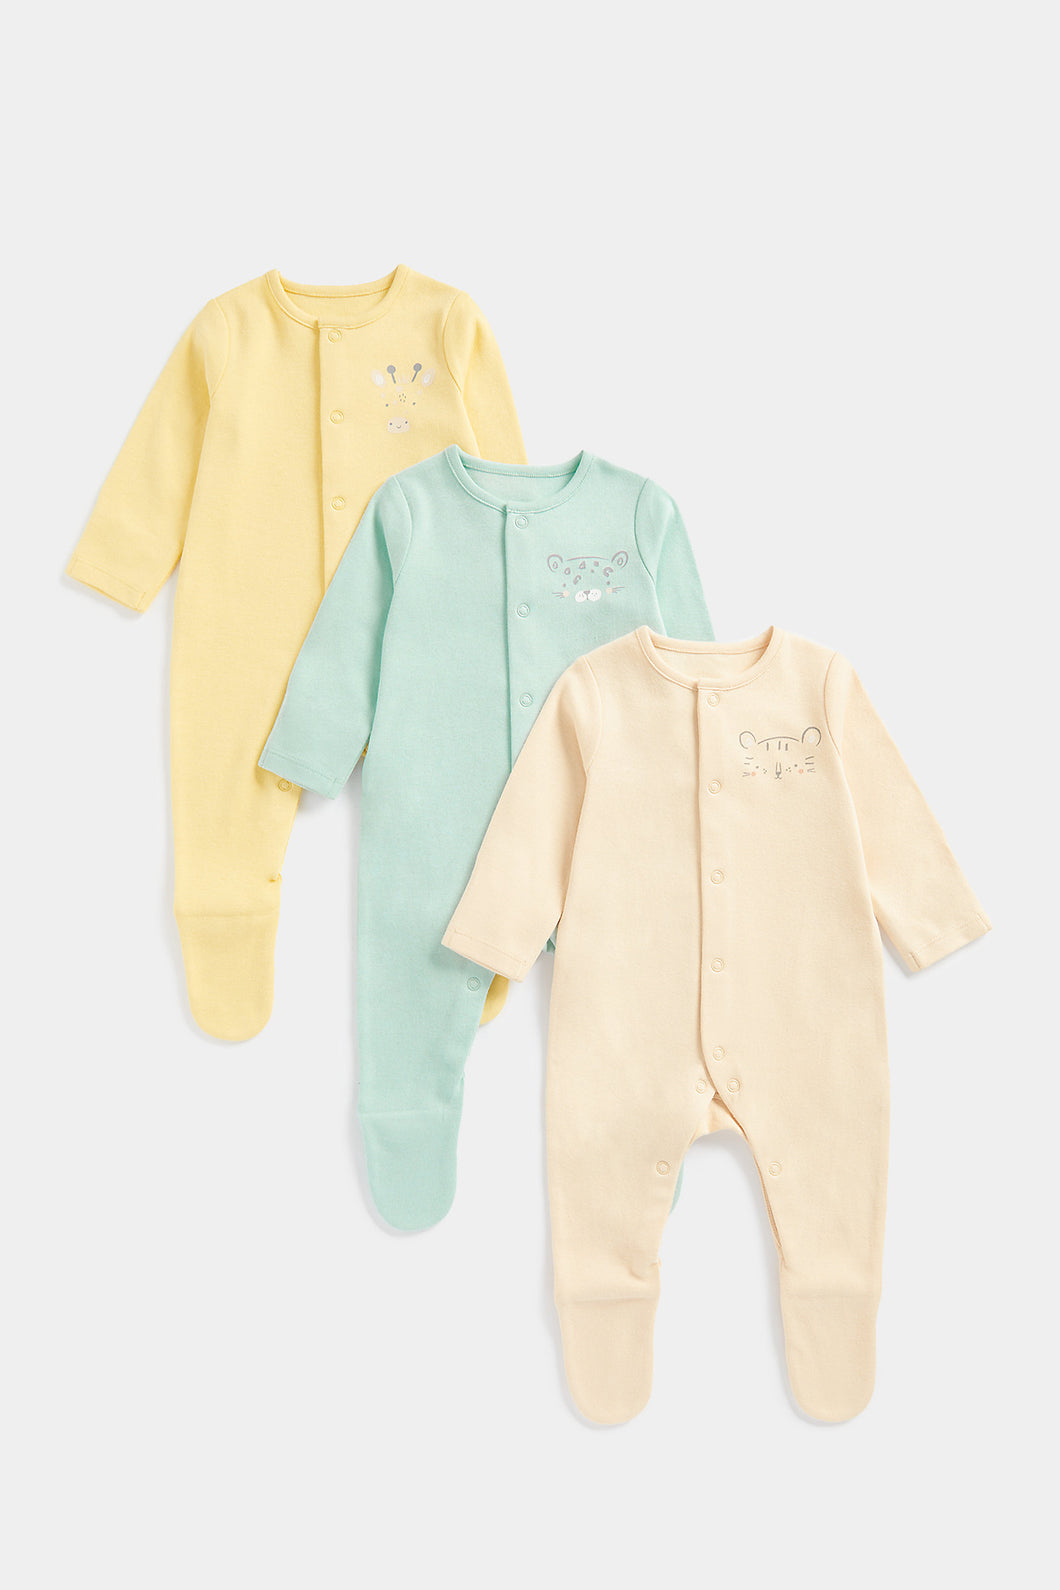 Mothercare Fun Faces Sleepsuits - 3 Pack